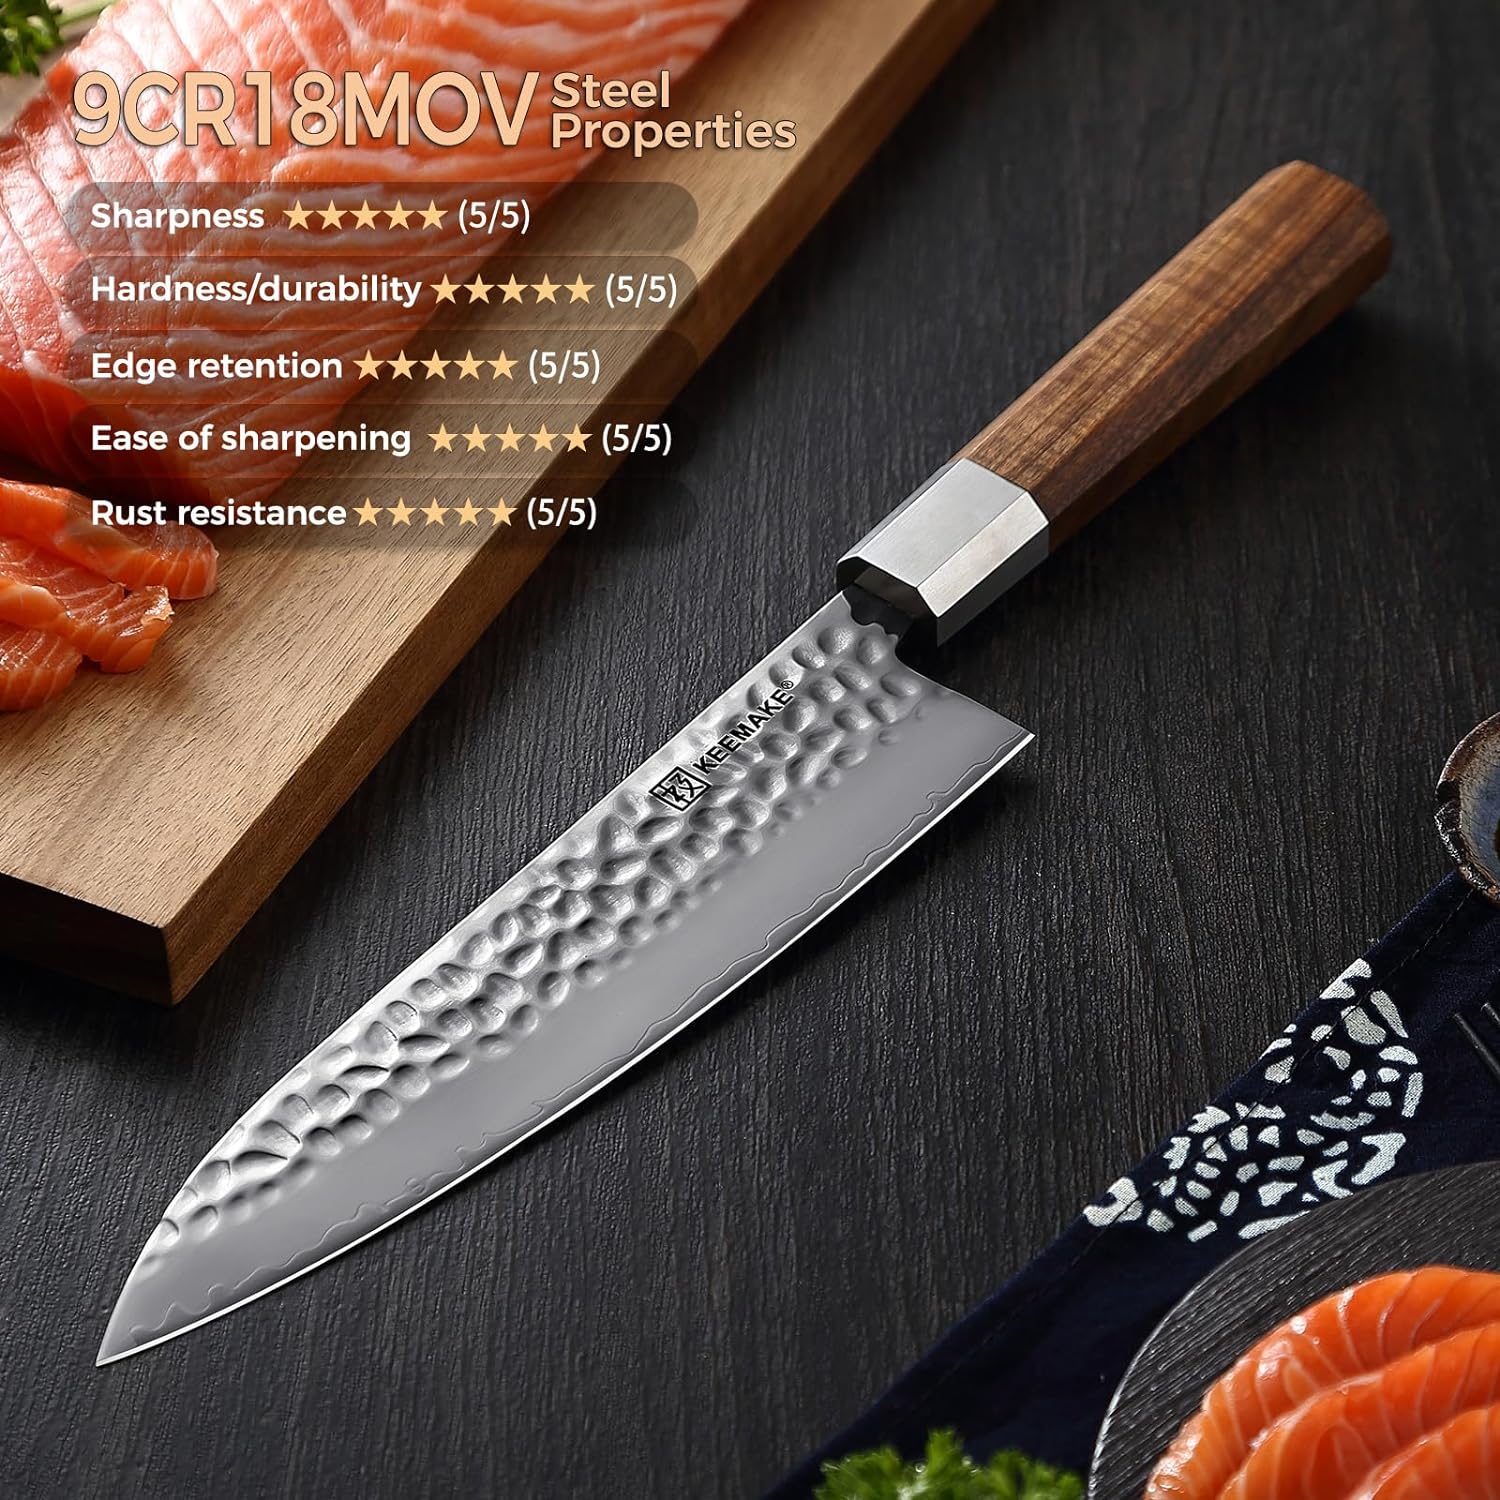 KEEMAKE Kitchen Knife Set of 4pcs, Chef Knife Set with 3-layer Japanese 9CR19MOV Clad Steel Blade